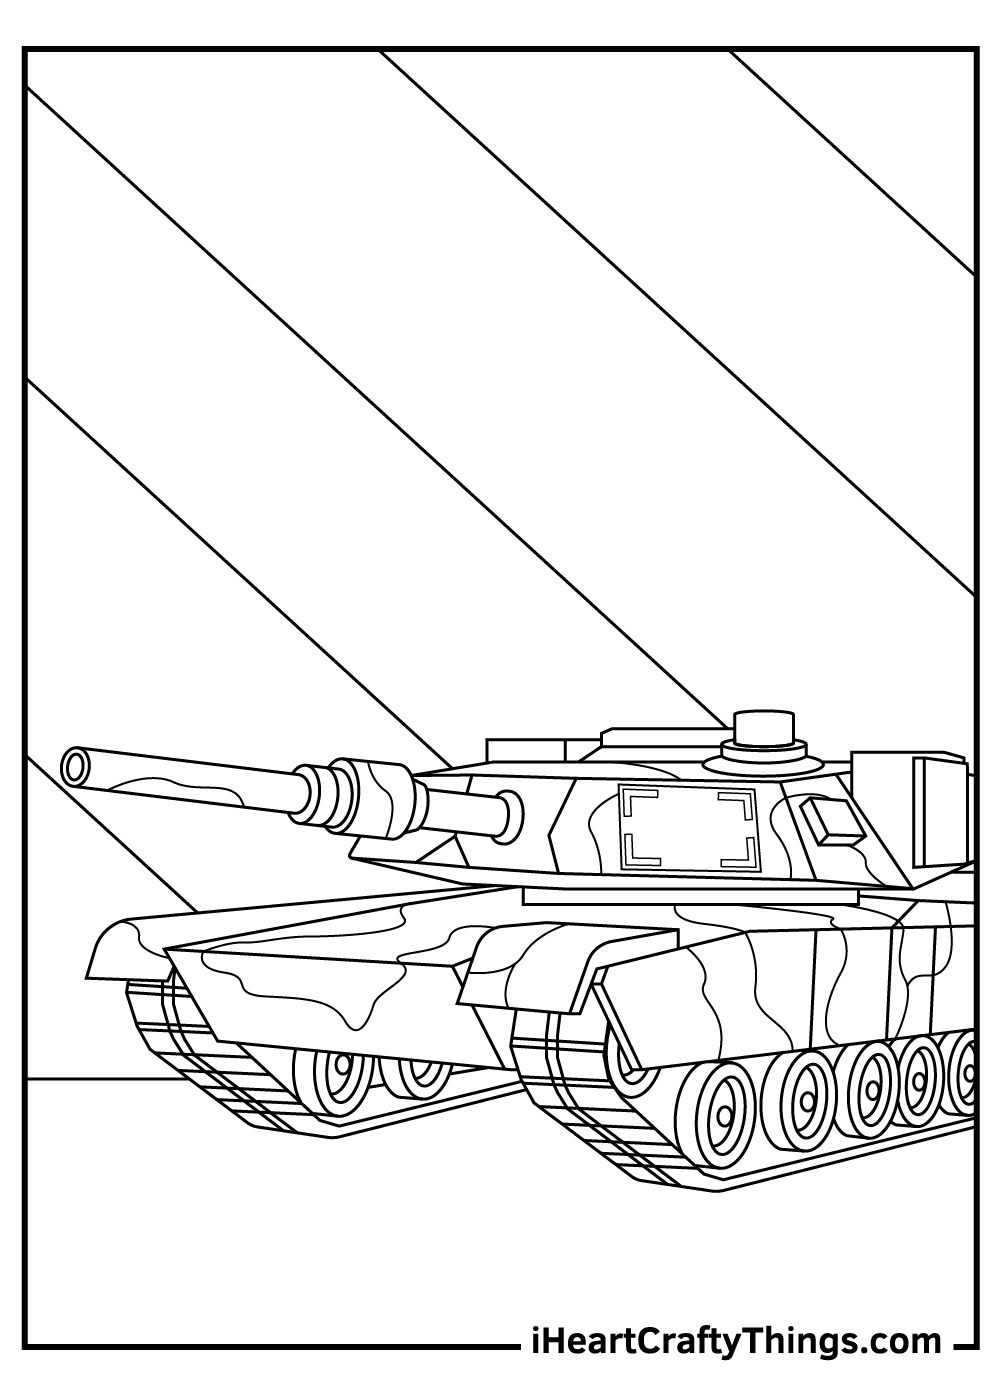 Tanks coloring pages free printables